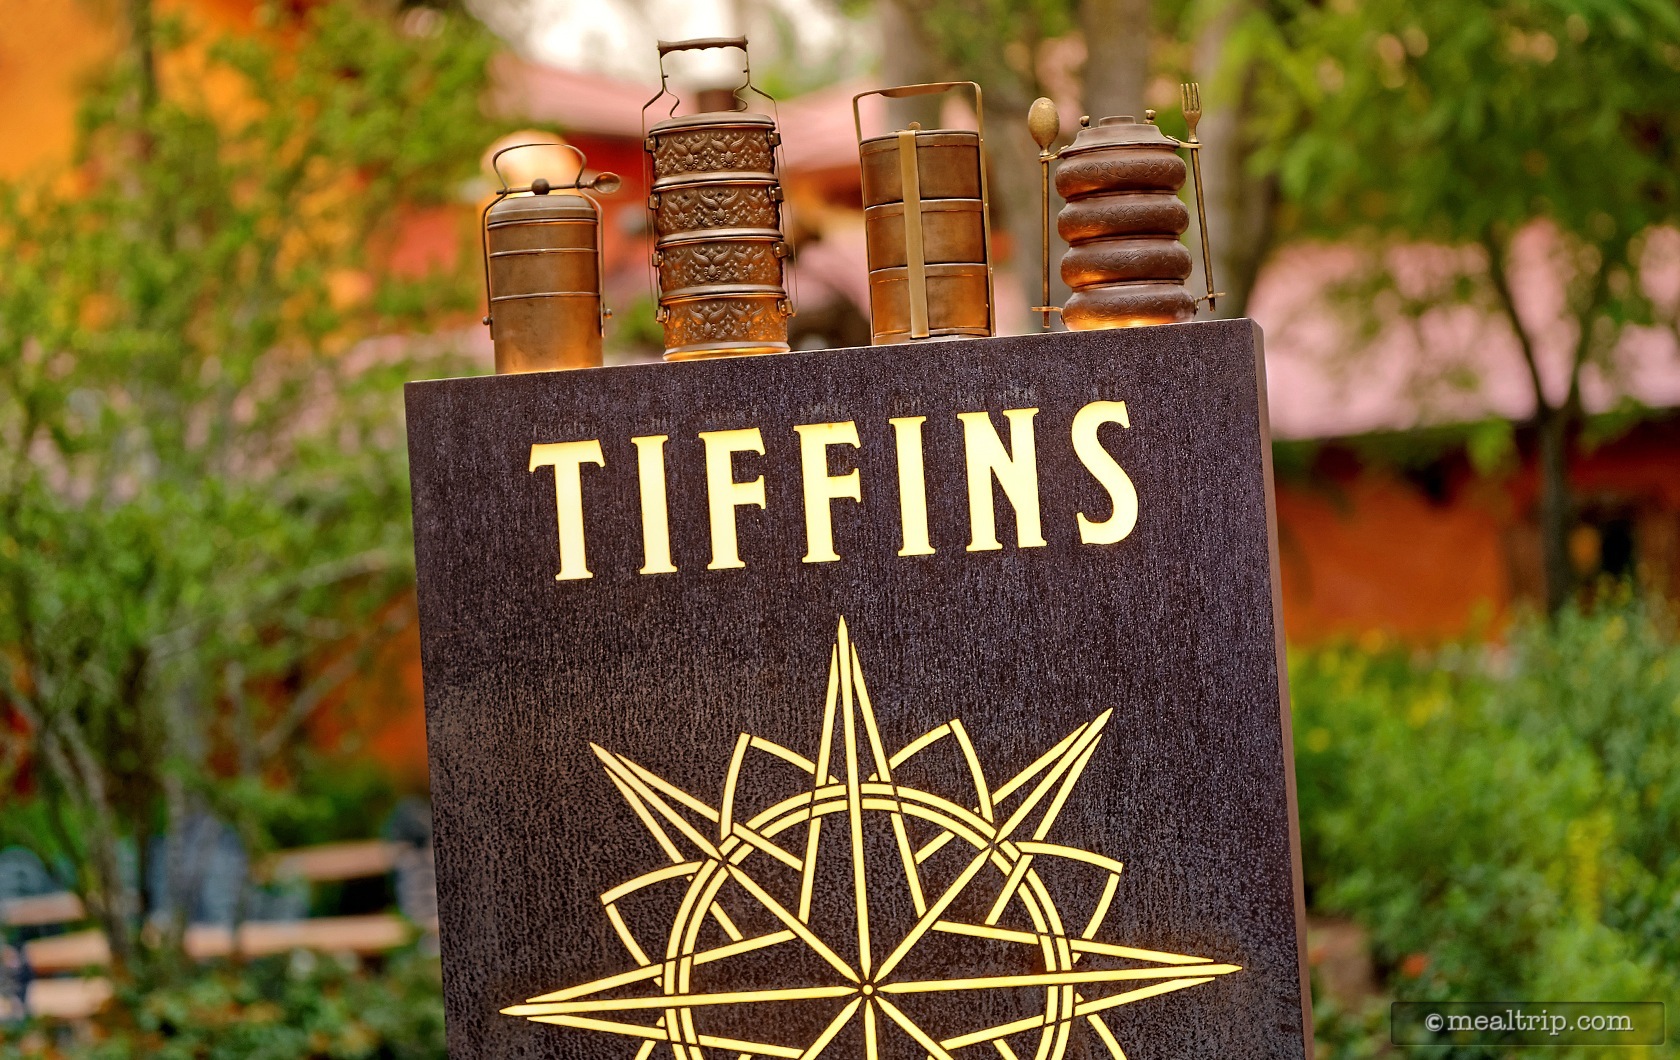 Photo Gallery for Tiffins at Animal Kingdom